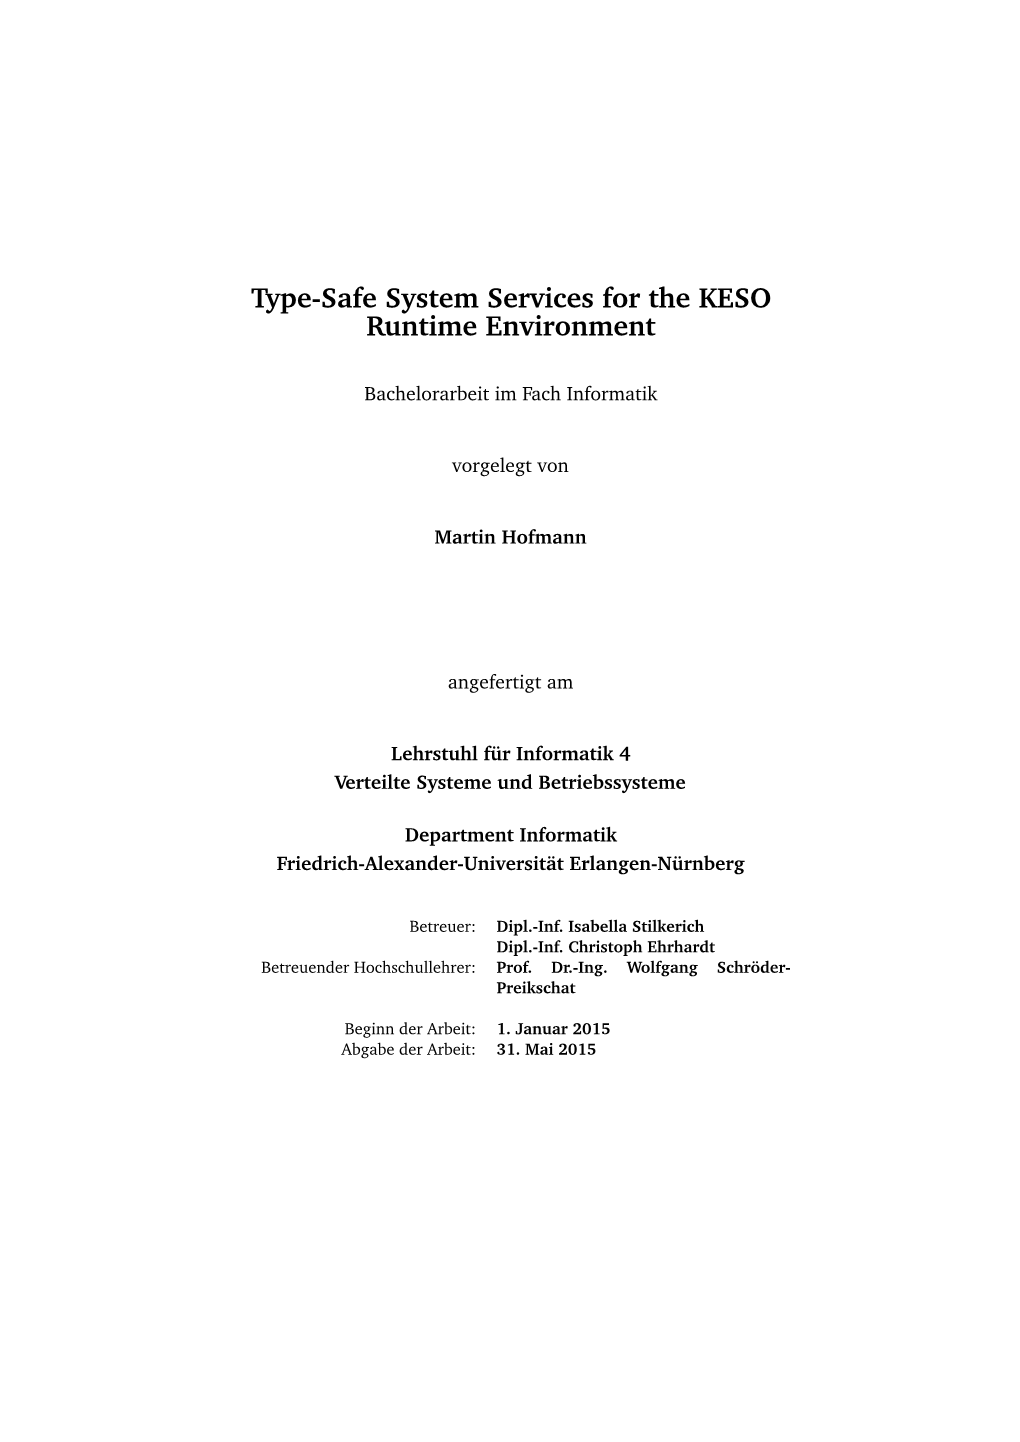 Type-Safe System Services for the KESO Runtime Environment